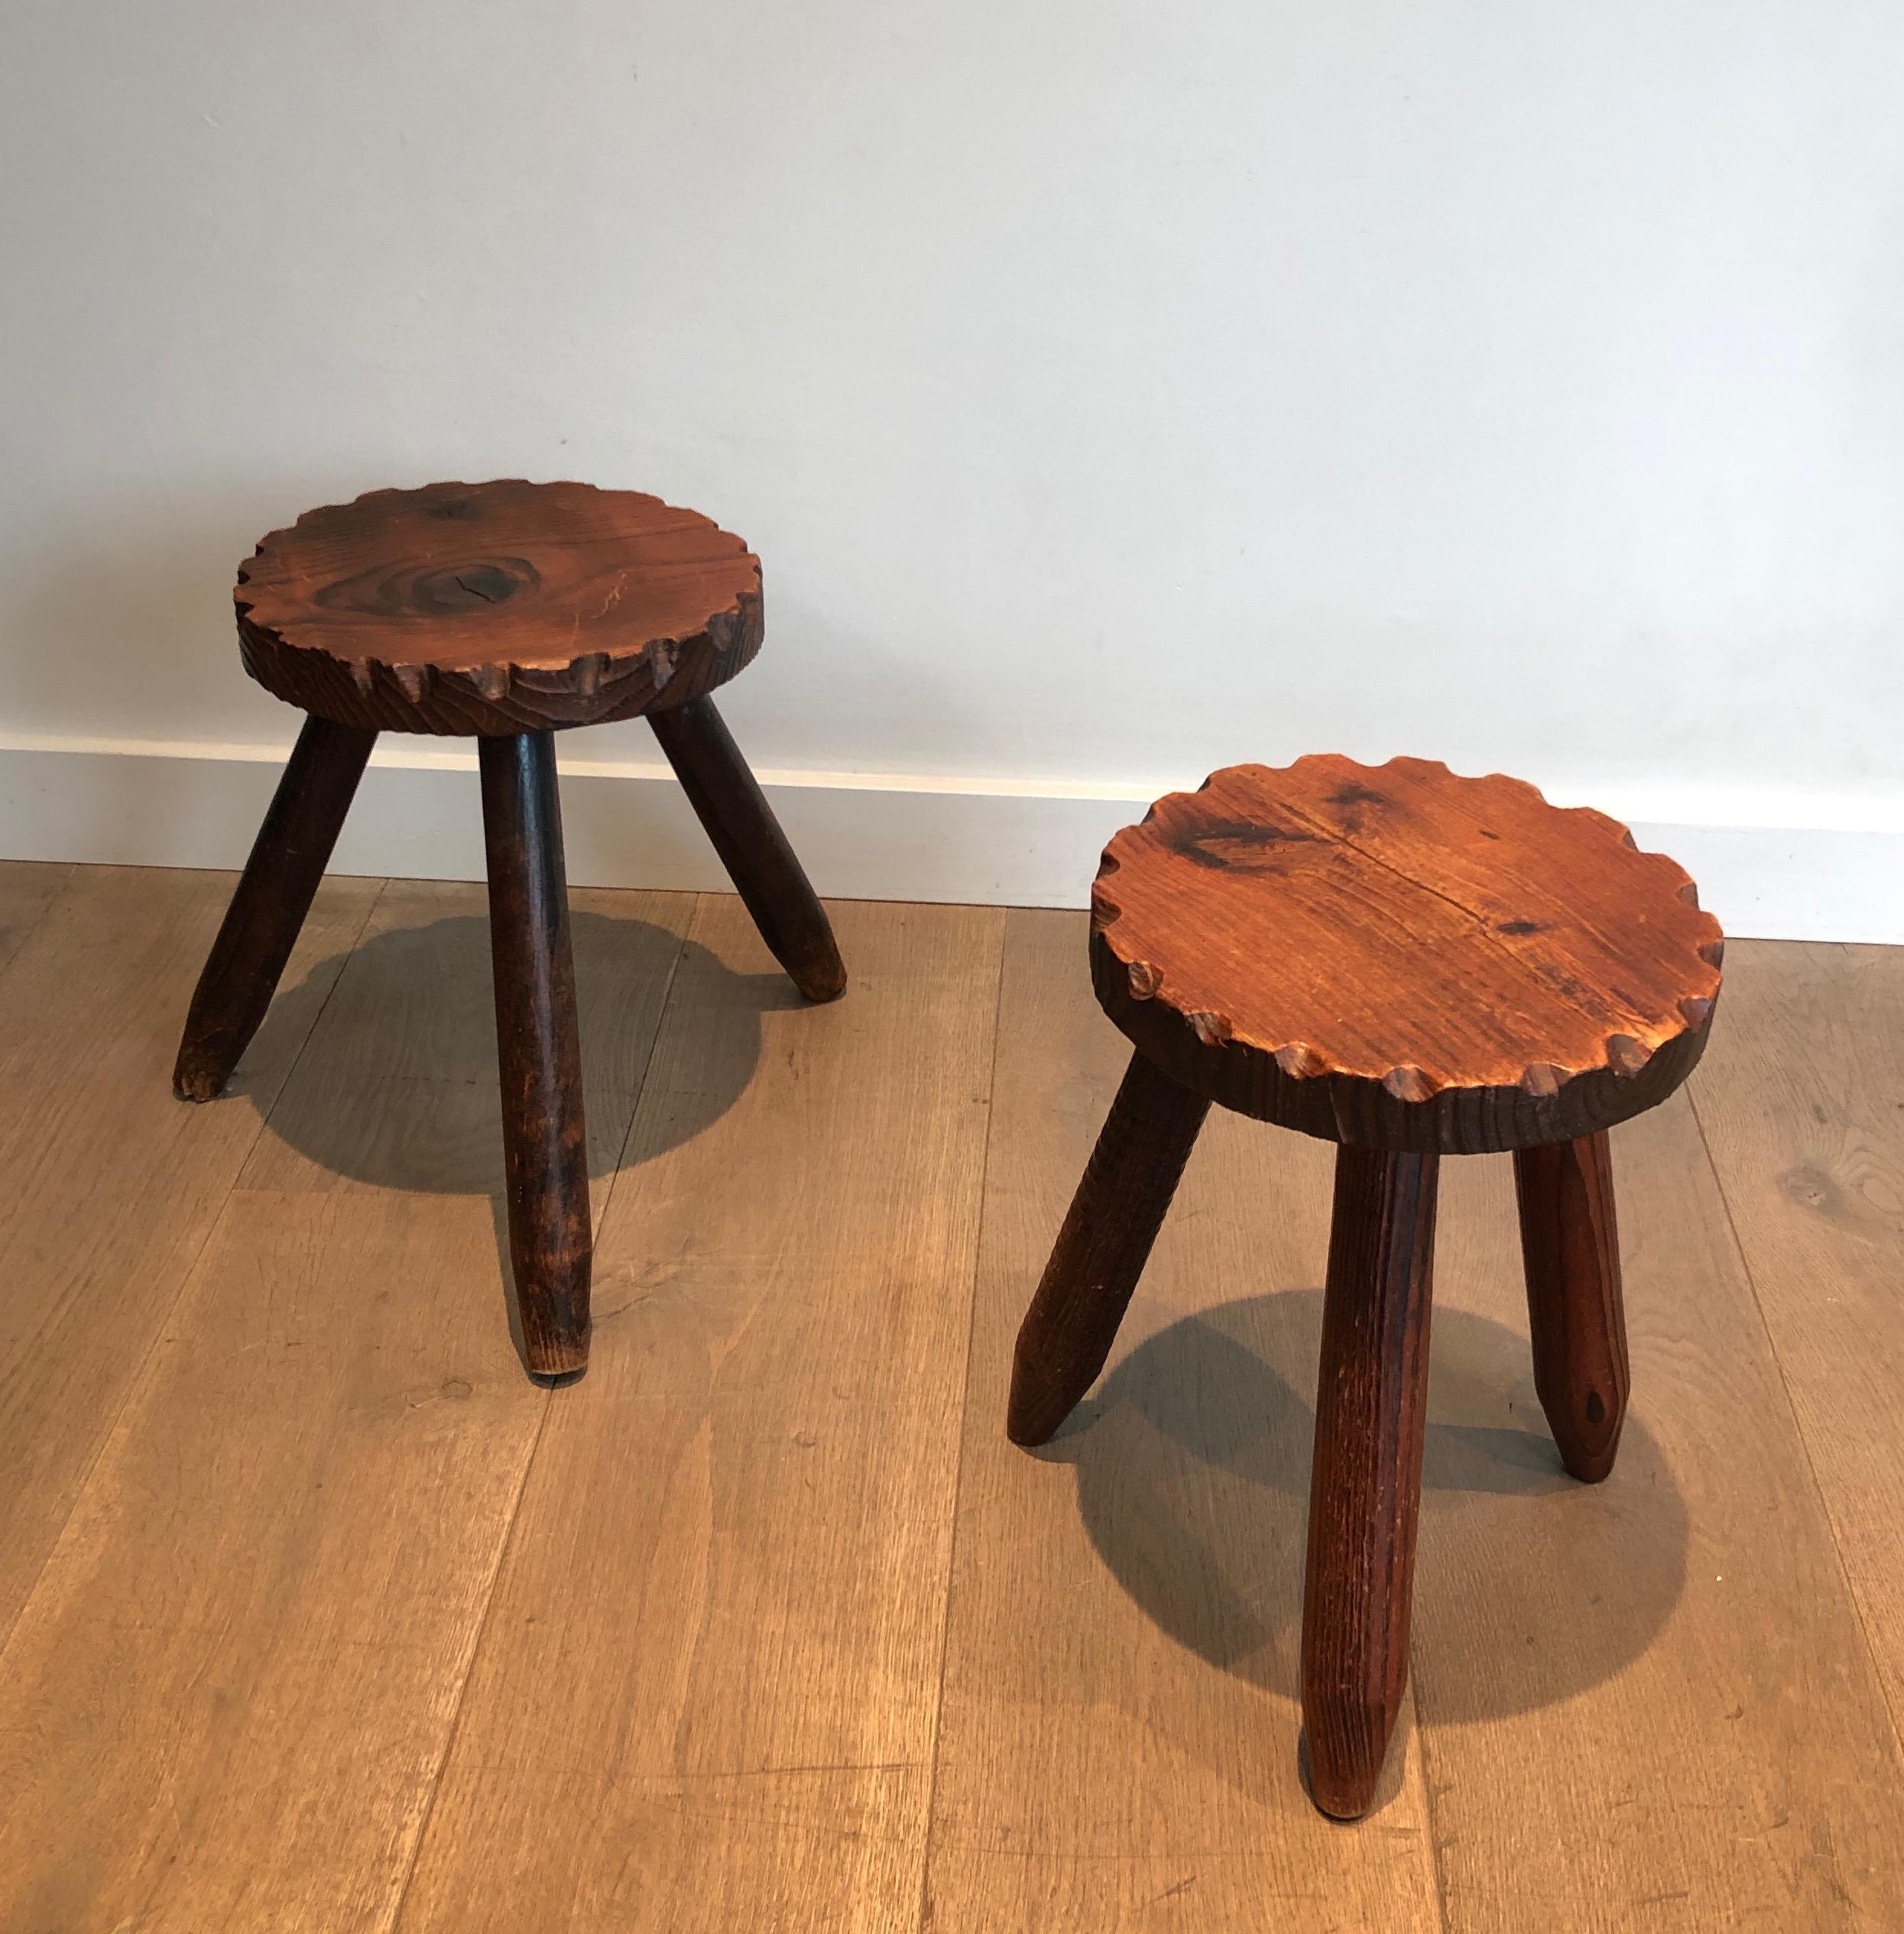 Pair of Pine Brutalist Stools, French Work, circa 1950 For Sale 7